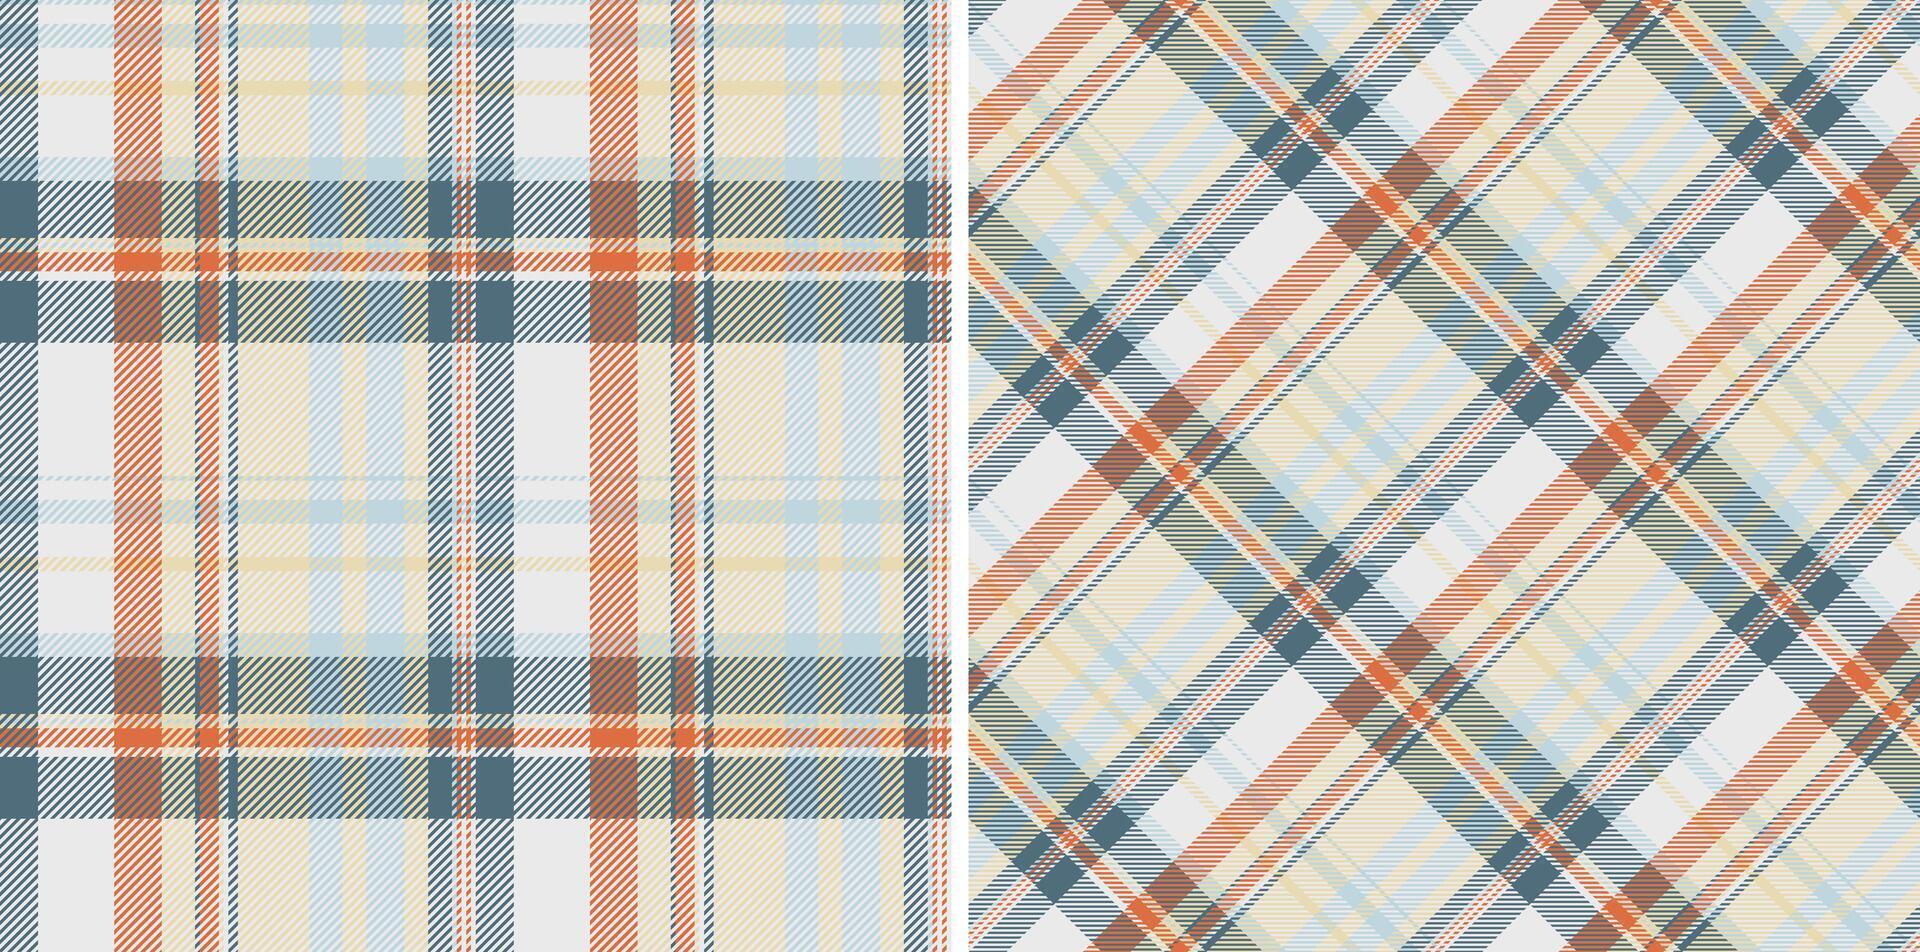 Background tartan fabric of textile check plaid with a vector seamless texture pattern. Set in trendy colors for oilcloth tablecloth designs.